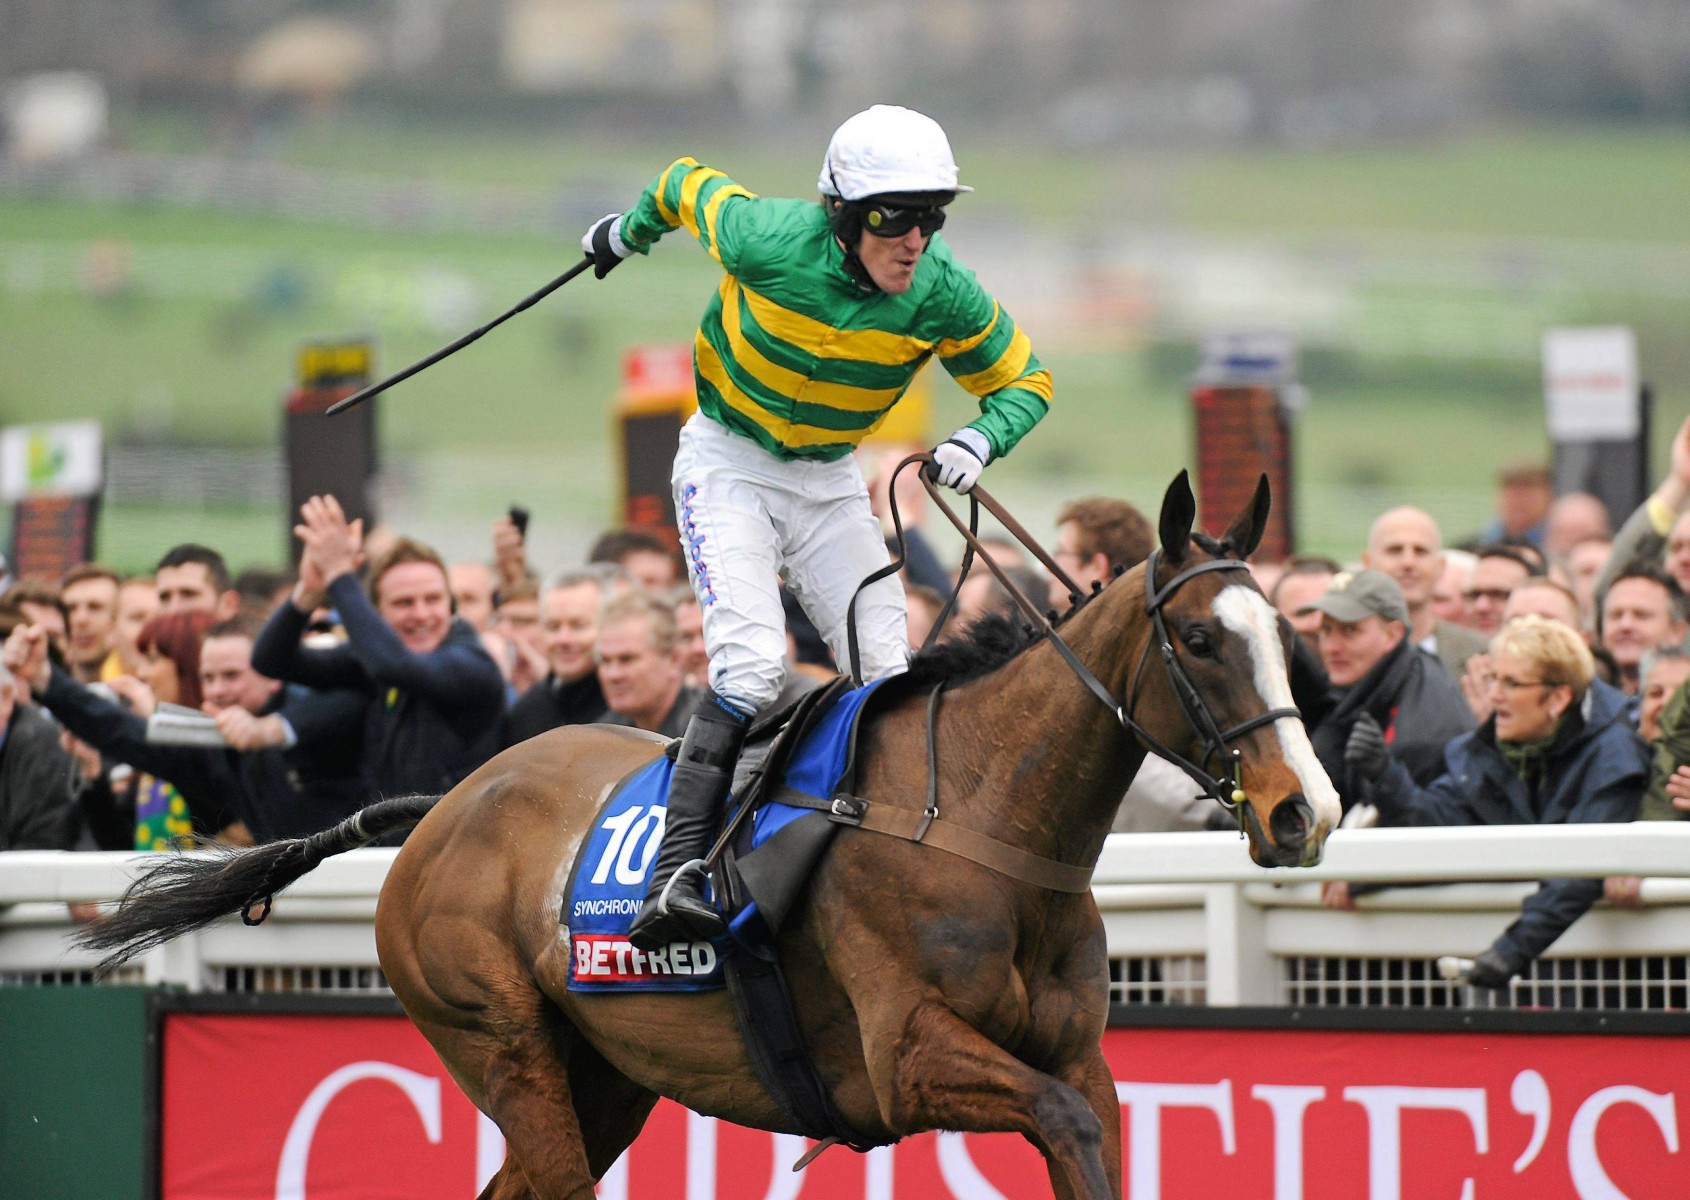 , Number 41: The horse who rose through the ranks to give AP McCoy a great day in the saddle at the Cheltenham Festival